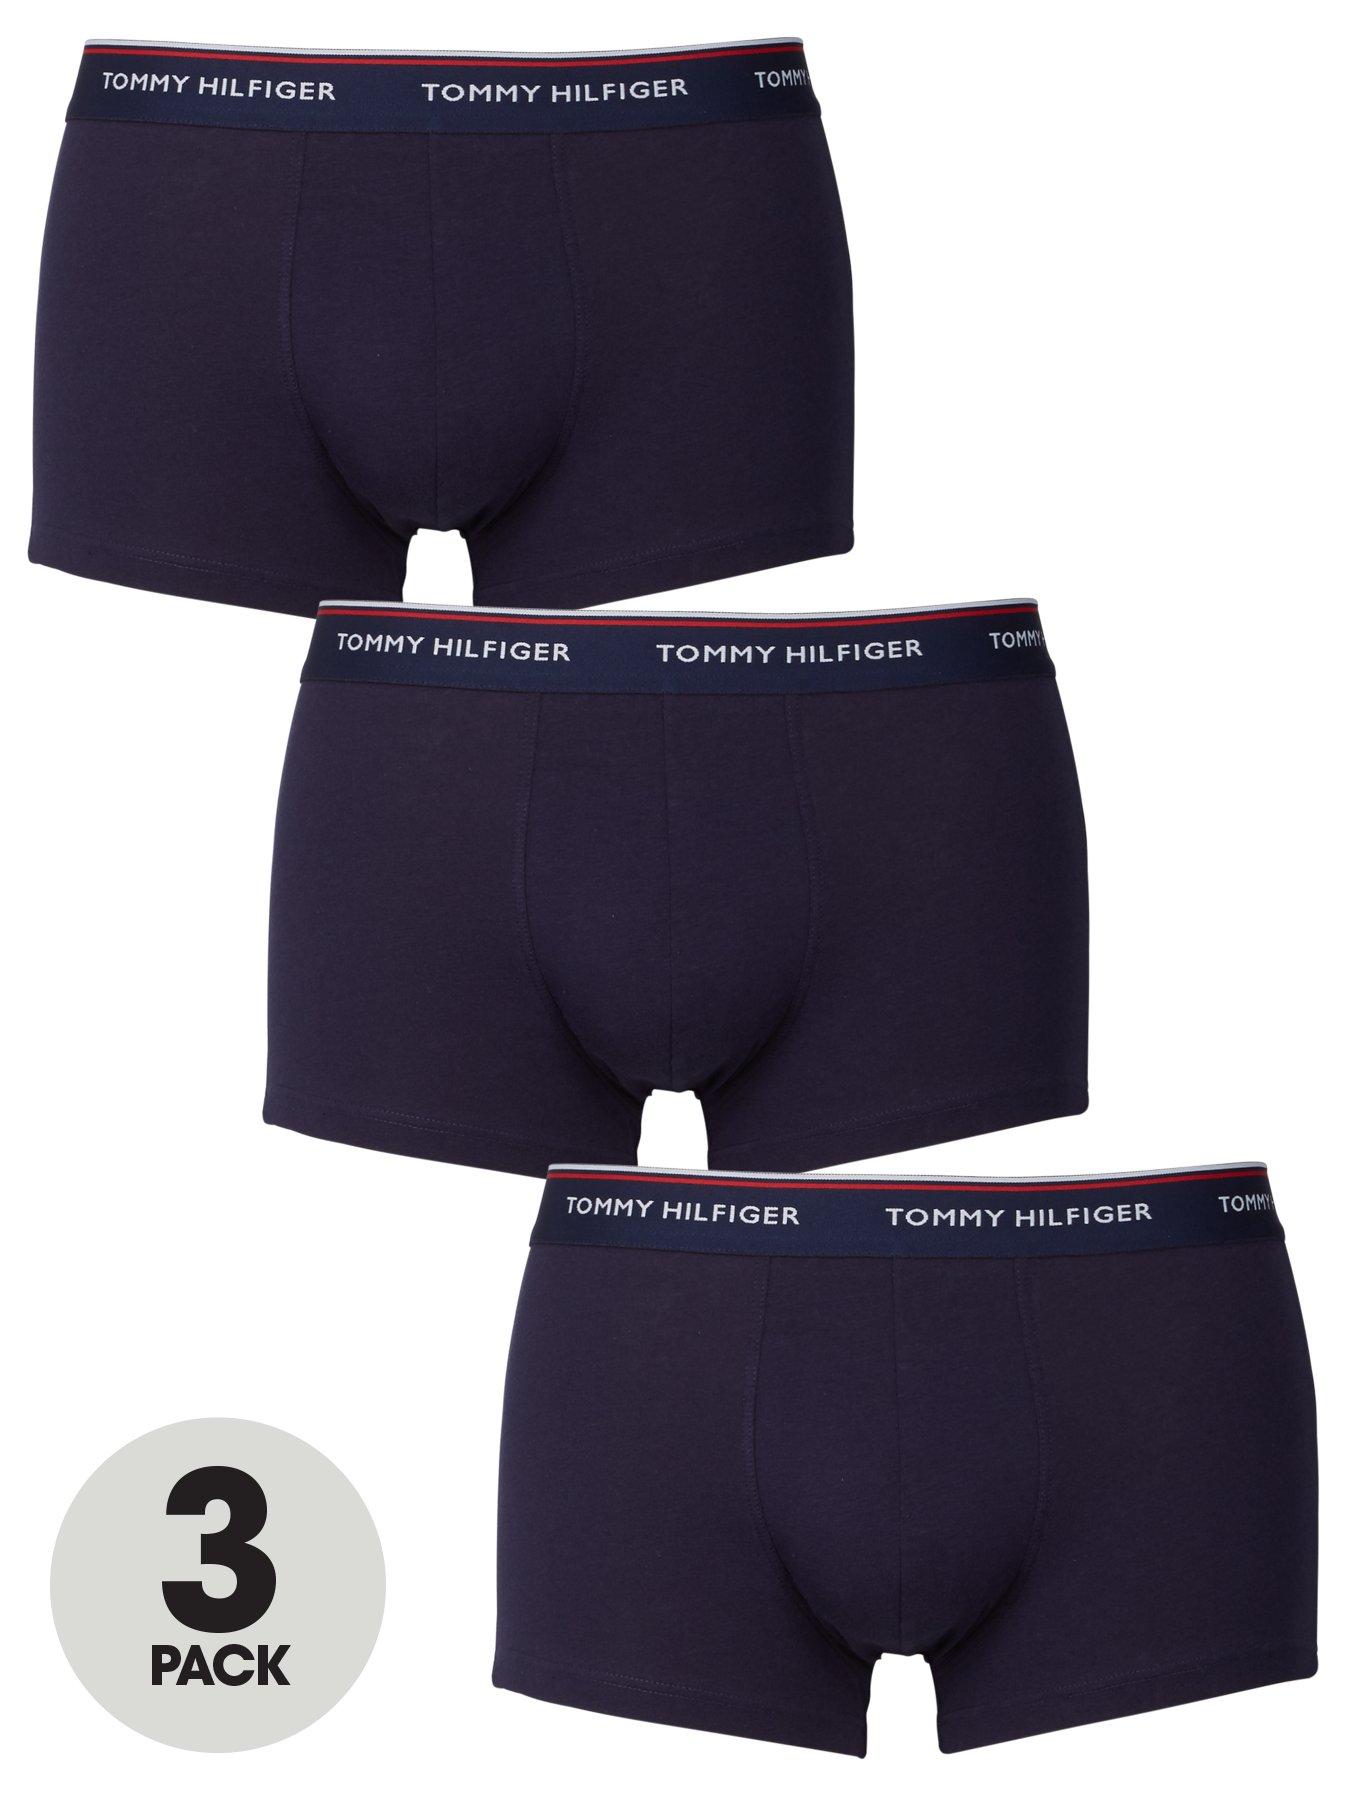 Tommy Hilfiger Tommy Hilfiger Low Rise Trunk 3 Pack Boxers - Navy